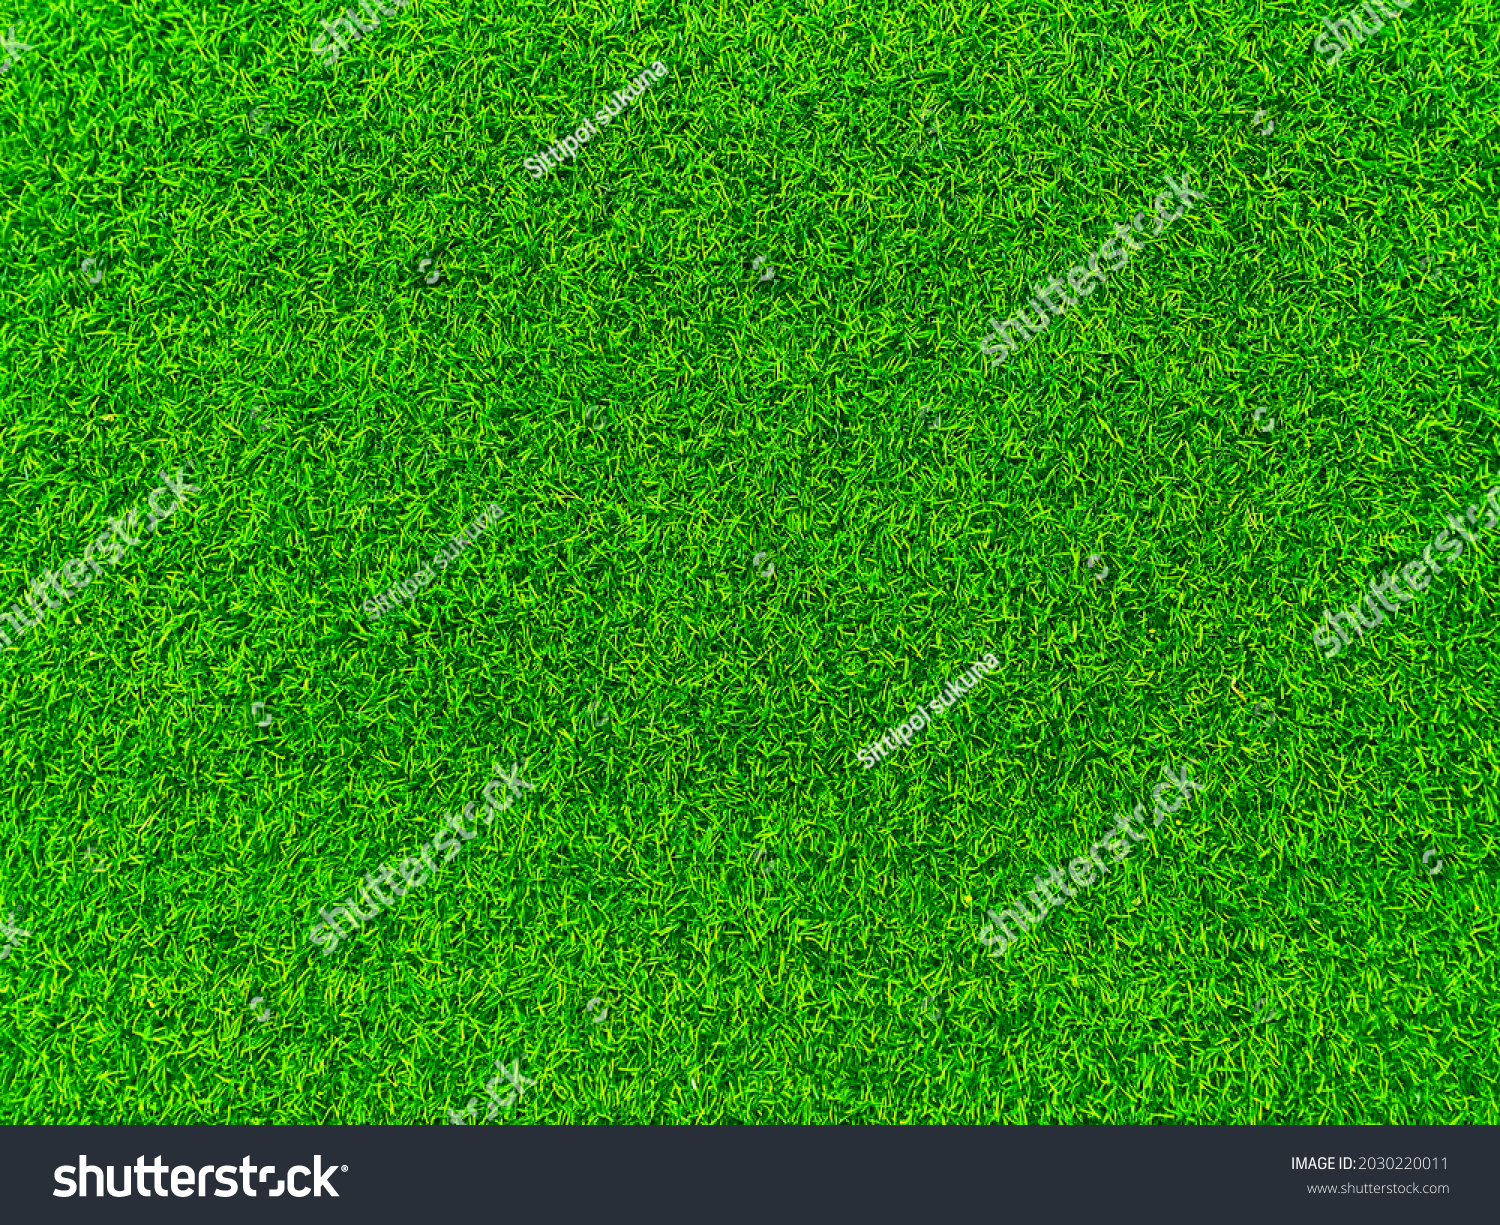 Green grass texture background grass garden  concept used for making green background football pitch, Grass Golf,  green lawn pattern textured background.
 #2030220011